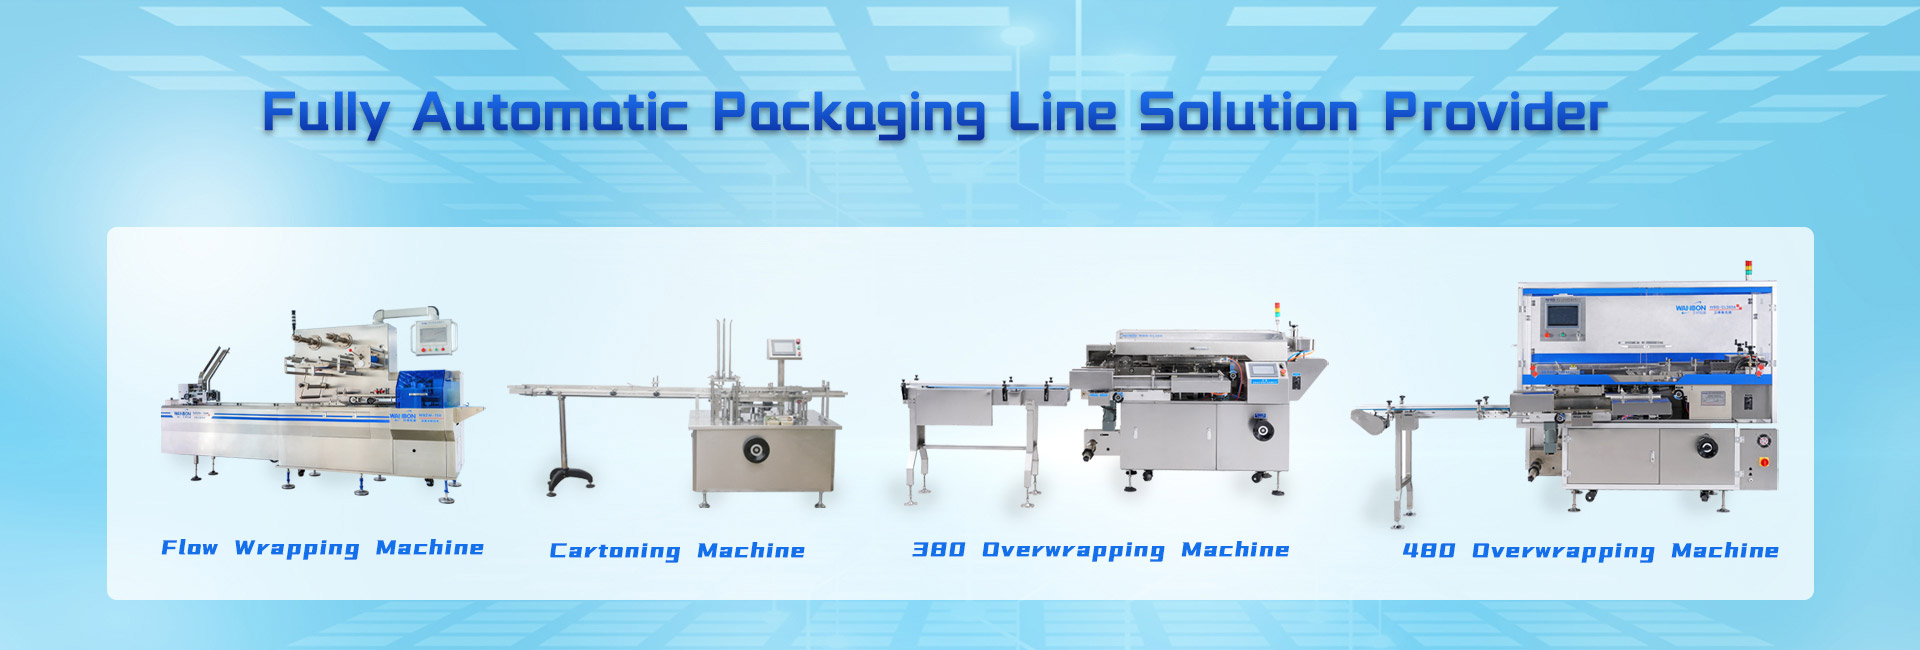 China overwrapping flow packing machine manufacturer